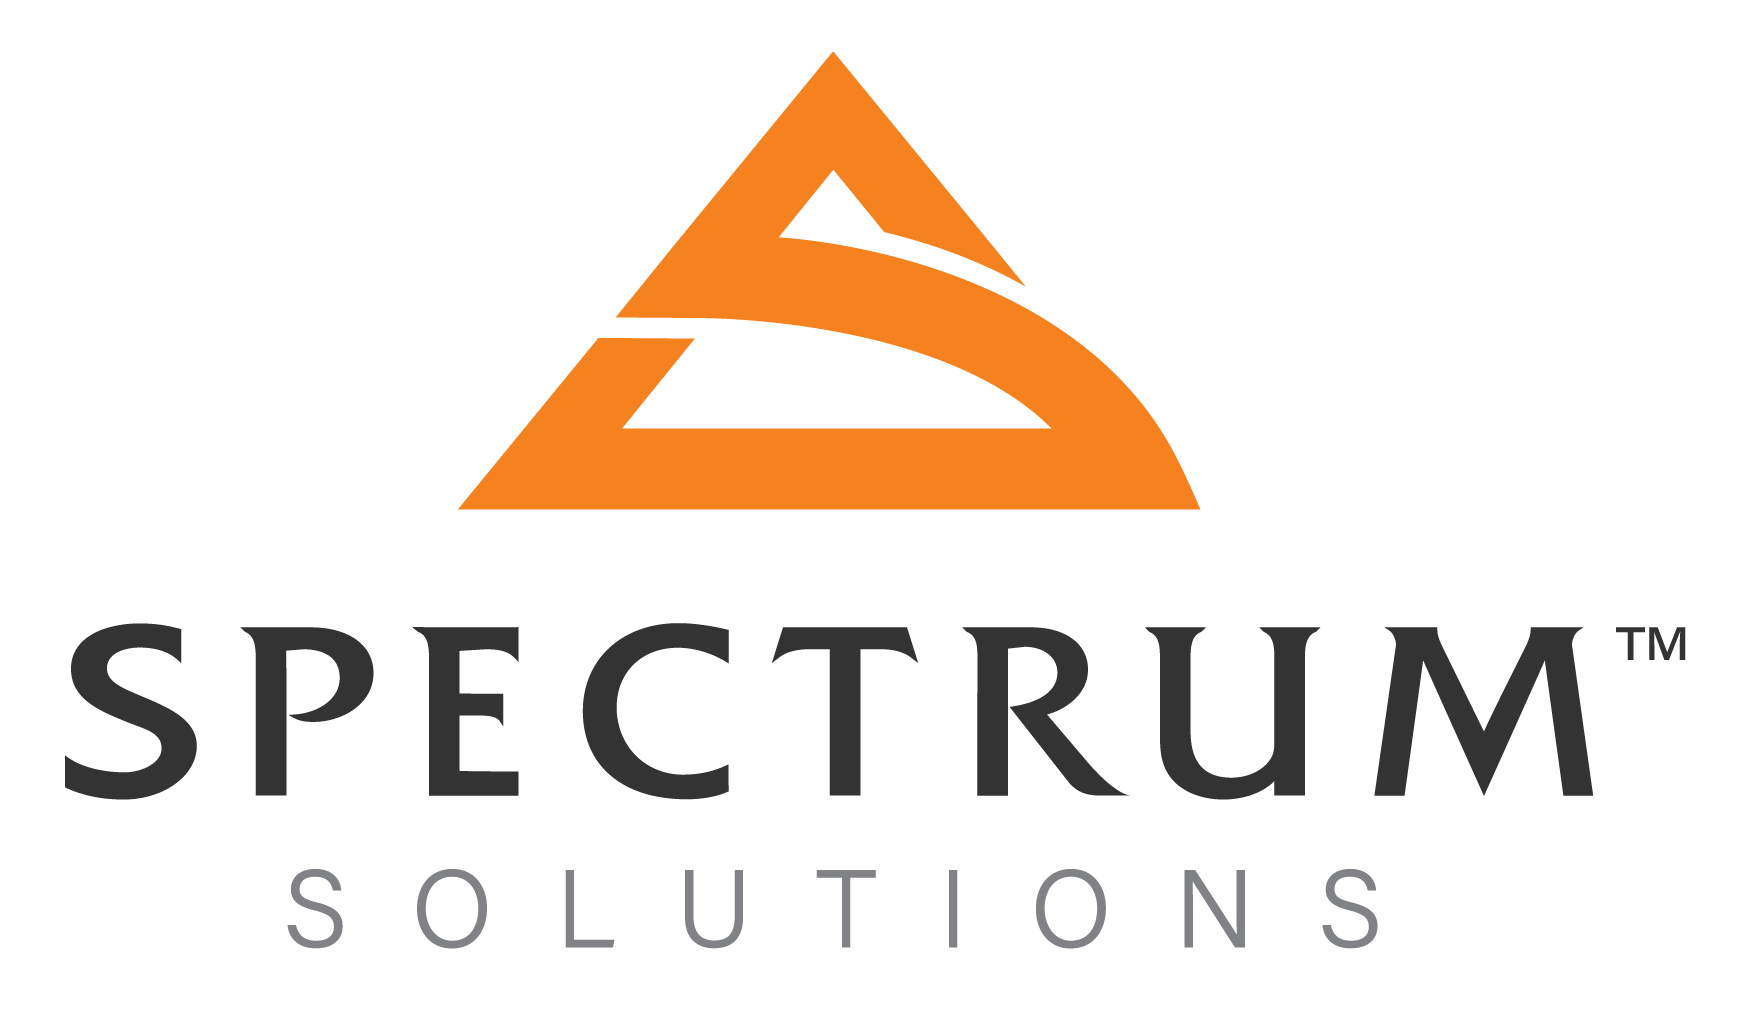 Spectrum Solutions Receives Device FDA Emergency Use Authorization for Unsupervised Saliva Collection for COVID